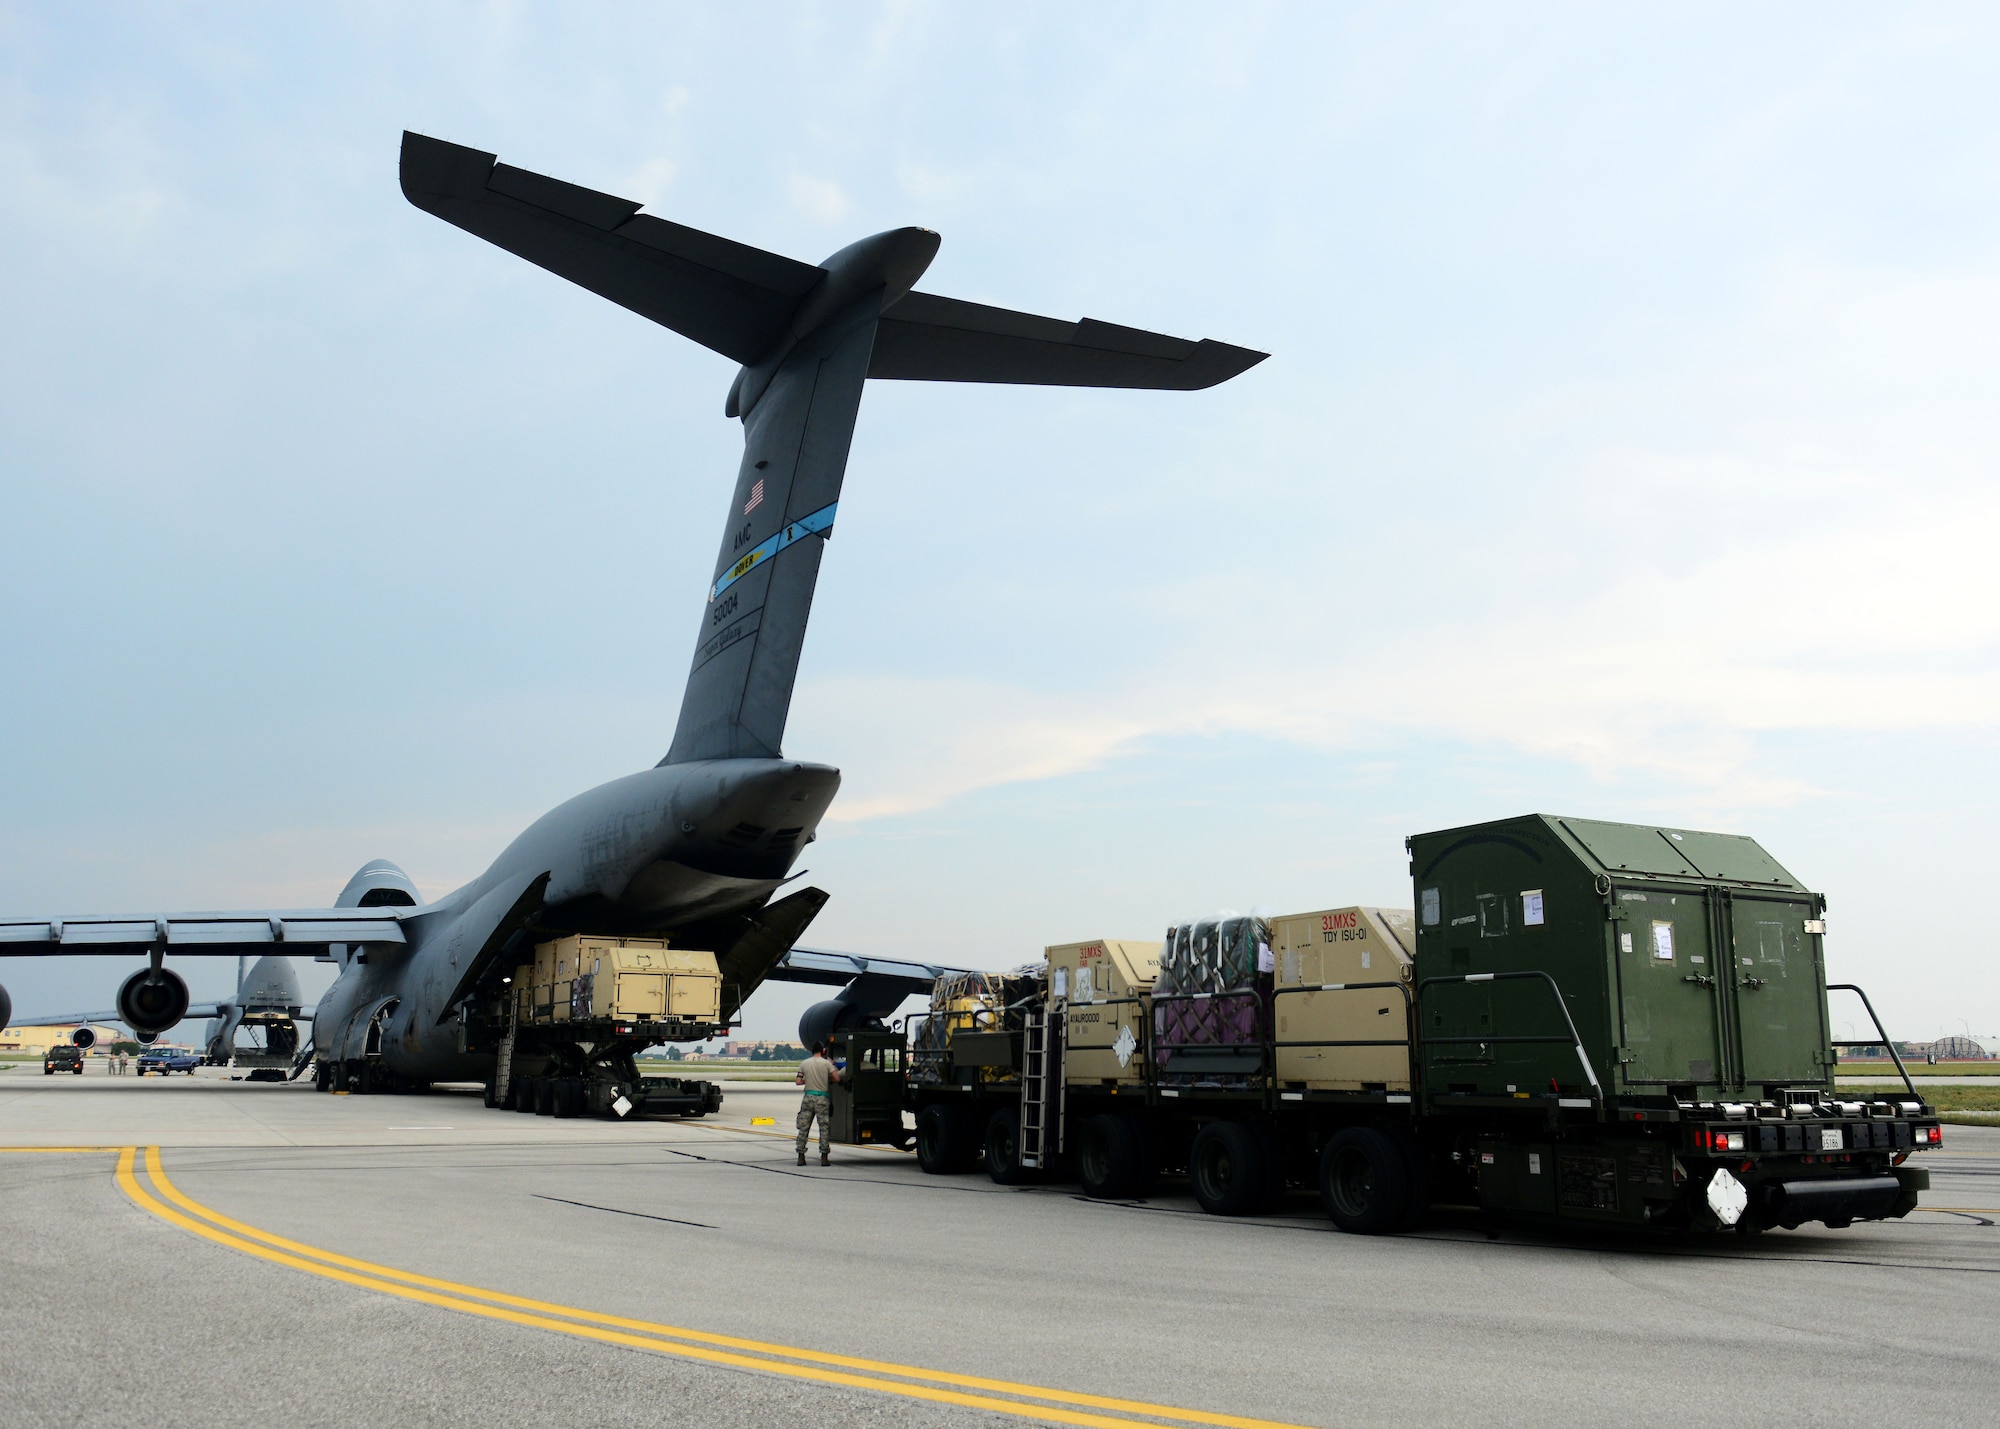 Cargo is loaded onto a C-5 Super Galaxy from the 436th Airlift Wing Aug. 8, 2015, at Aviano Air Base, Italy. The cargo will be delivered to Incirlik Air Base, Turkey, in support of Operation Inherent Resolve. This deployment coincides with Turkey's decision to host U.S. aircraft to conduct counter-ISIL operations. (U.S. Air Force photo by Airman 1st Class Deana Heitzman)